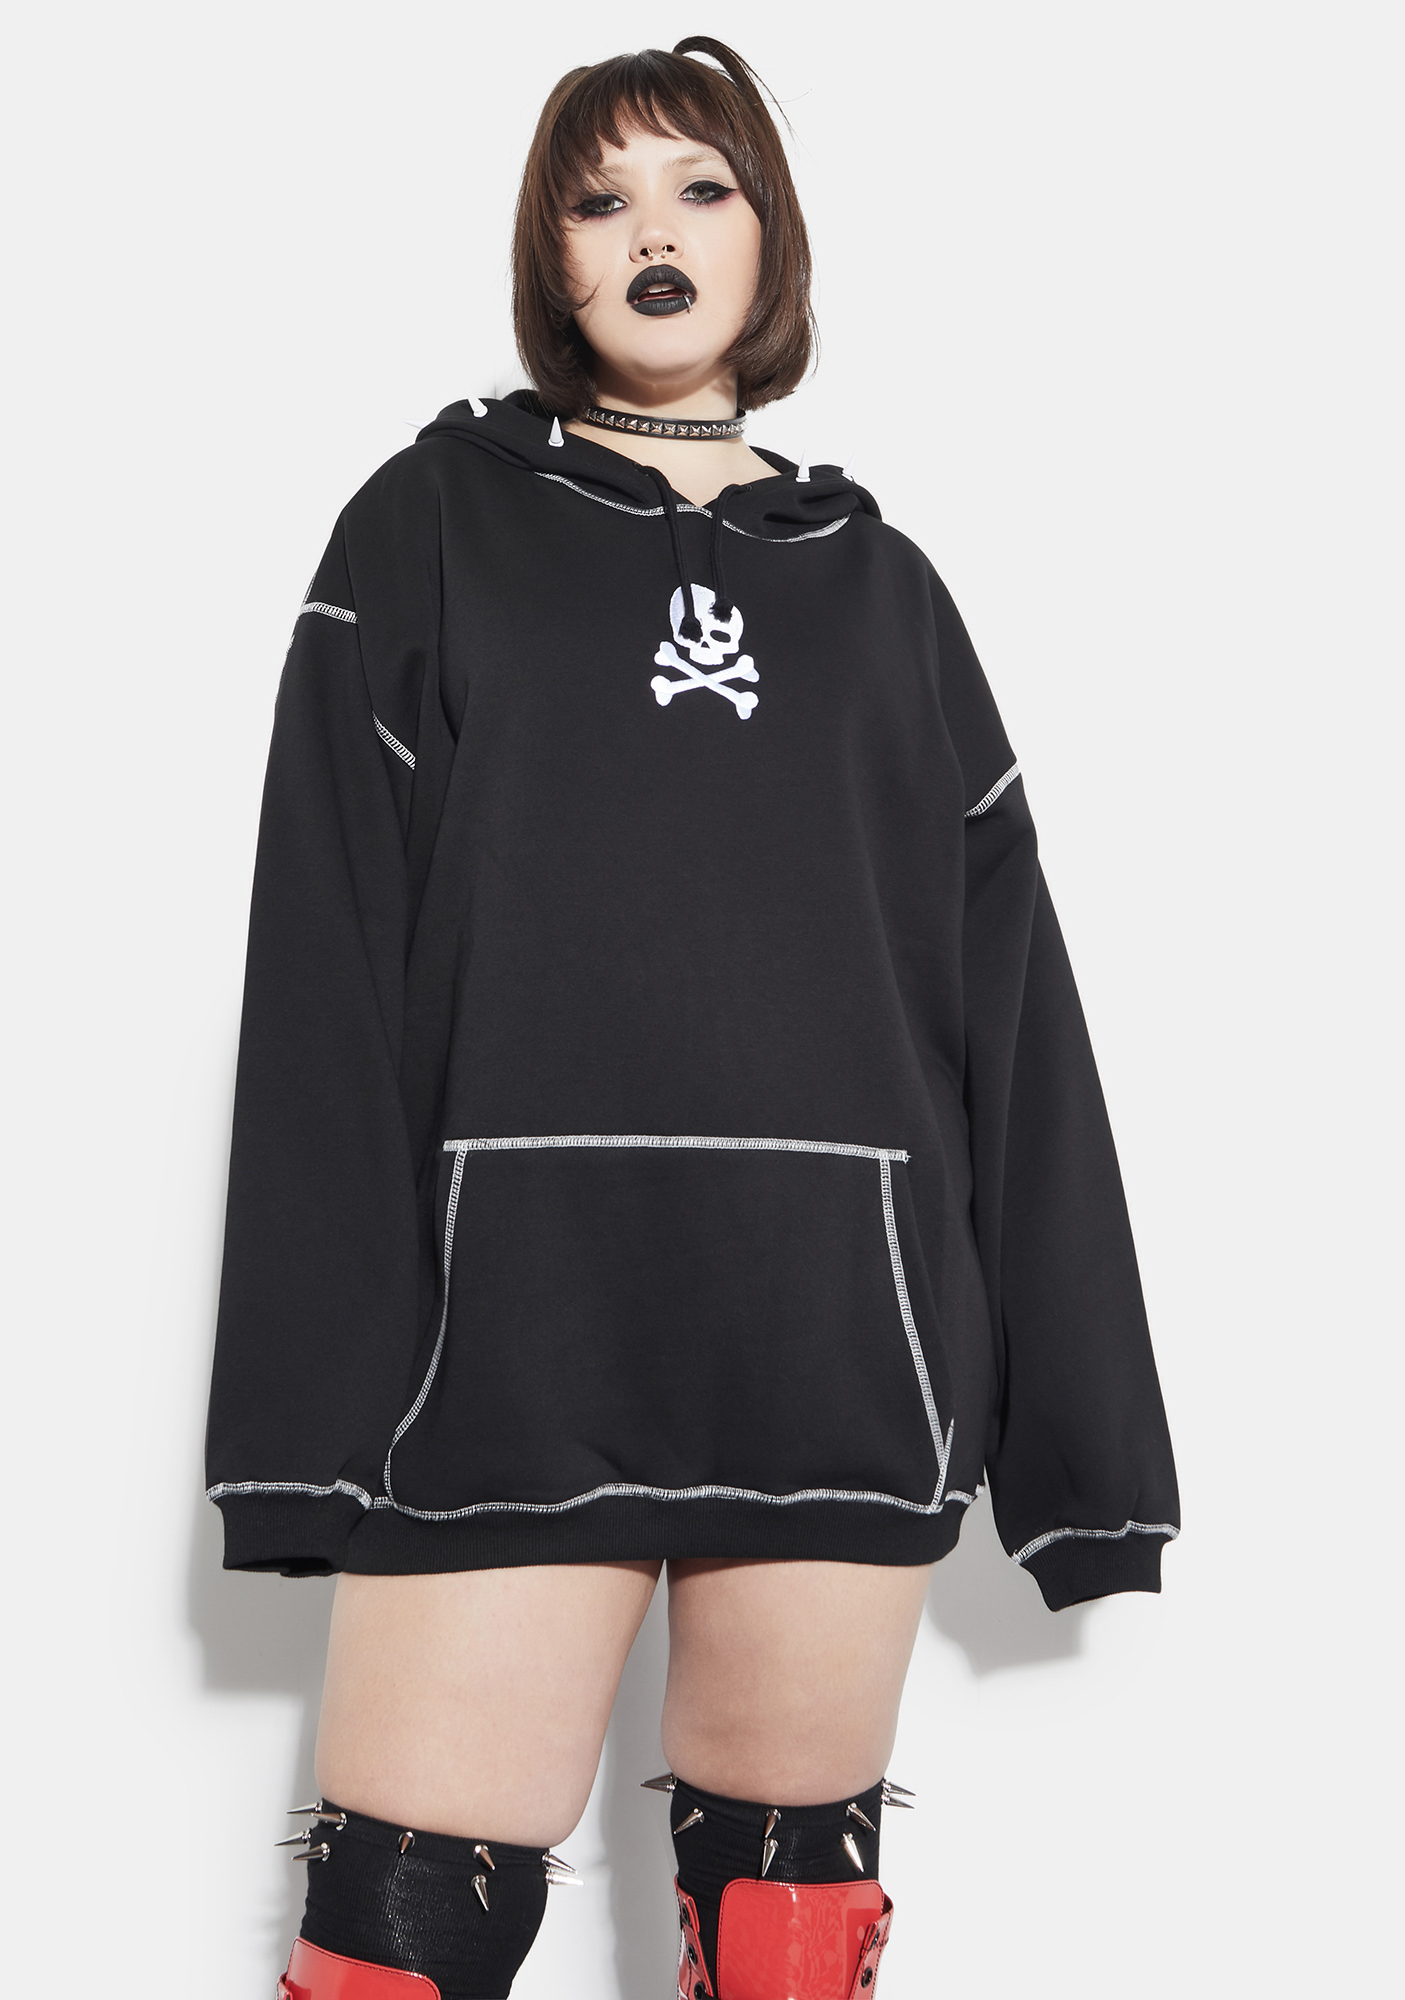 Plus Size Current Mood Skull Spiked Hoodie With Contrast Stitching ...